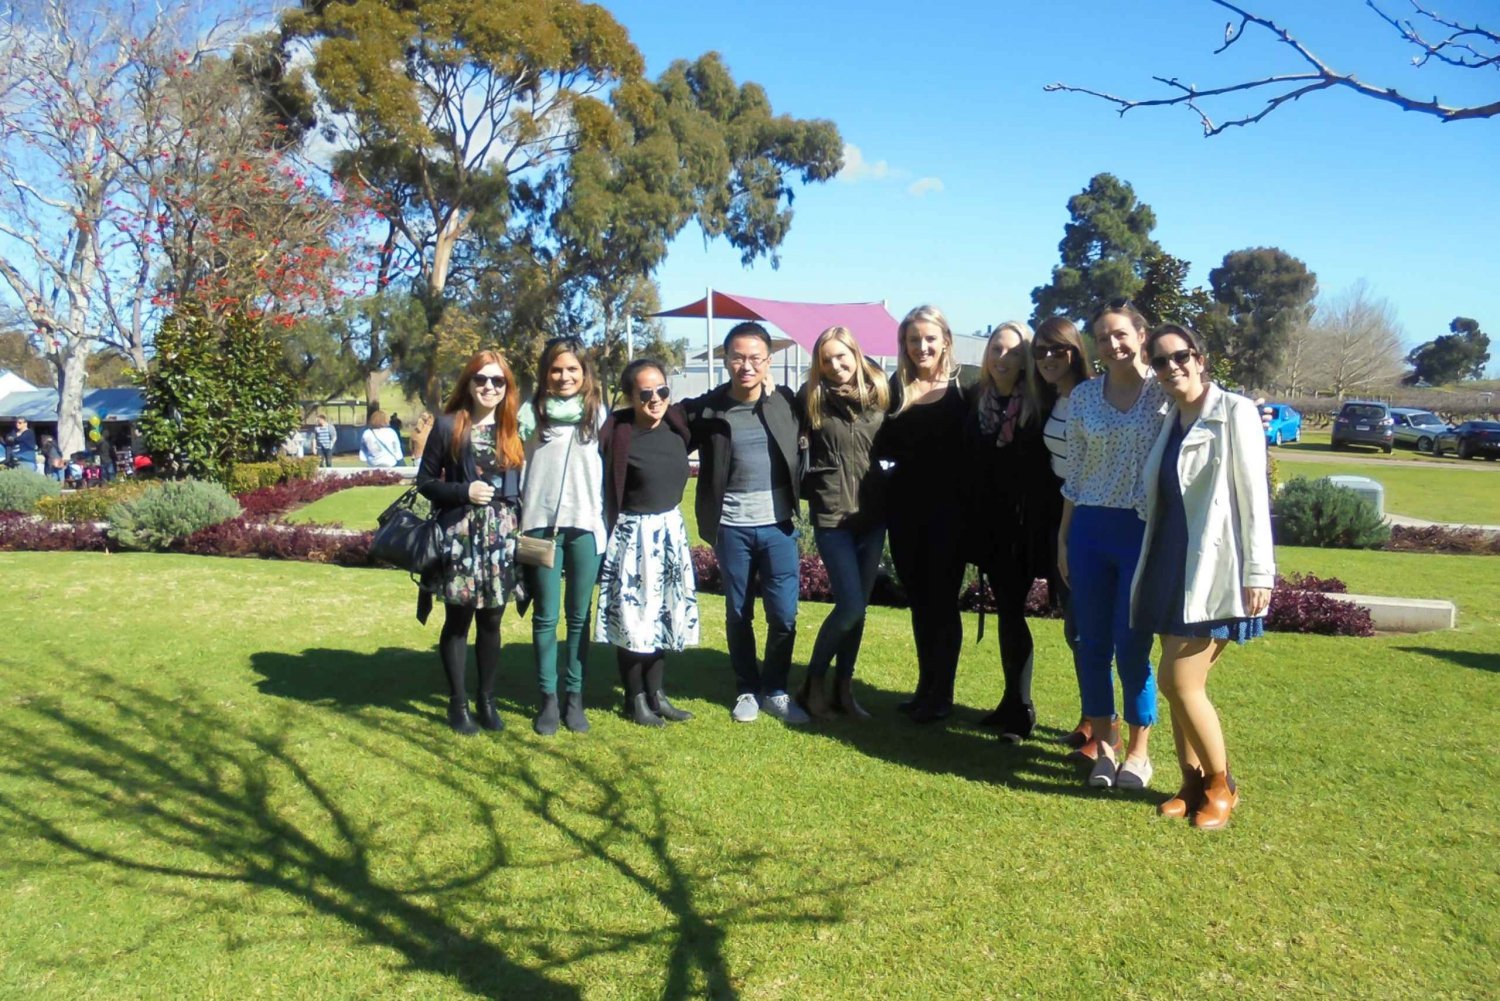 Perth: Full Day Swan Valley Cruise & Wine Tasting With Lunch